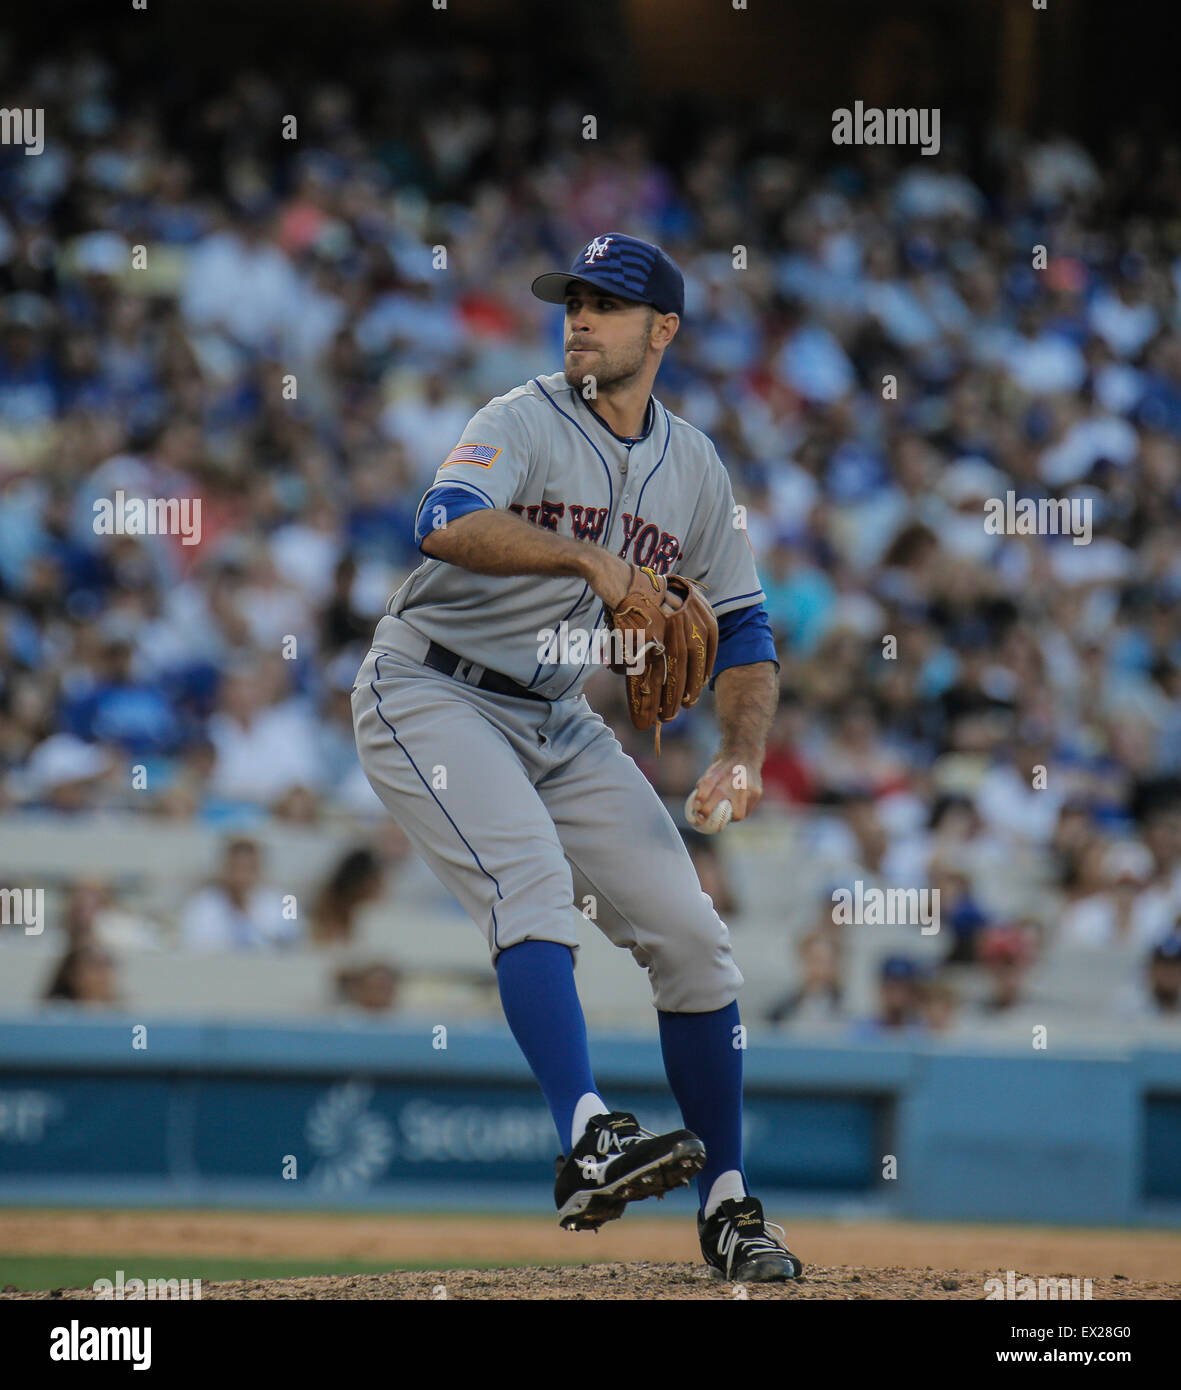 Los Angeles USA CA. 04th July, 2015. NY Mets during MLB game between LA Dodgers and NY Mets at Dodgers Stadium Los Angeles Calif. Thurman James/CSM/Alamy Live News Stock Photo